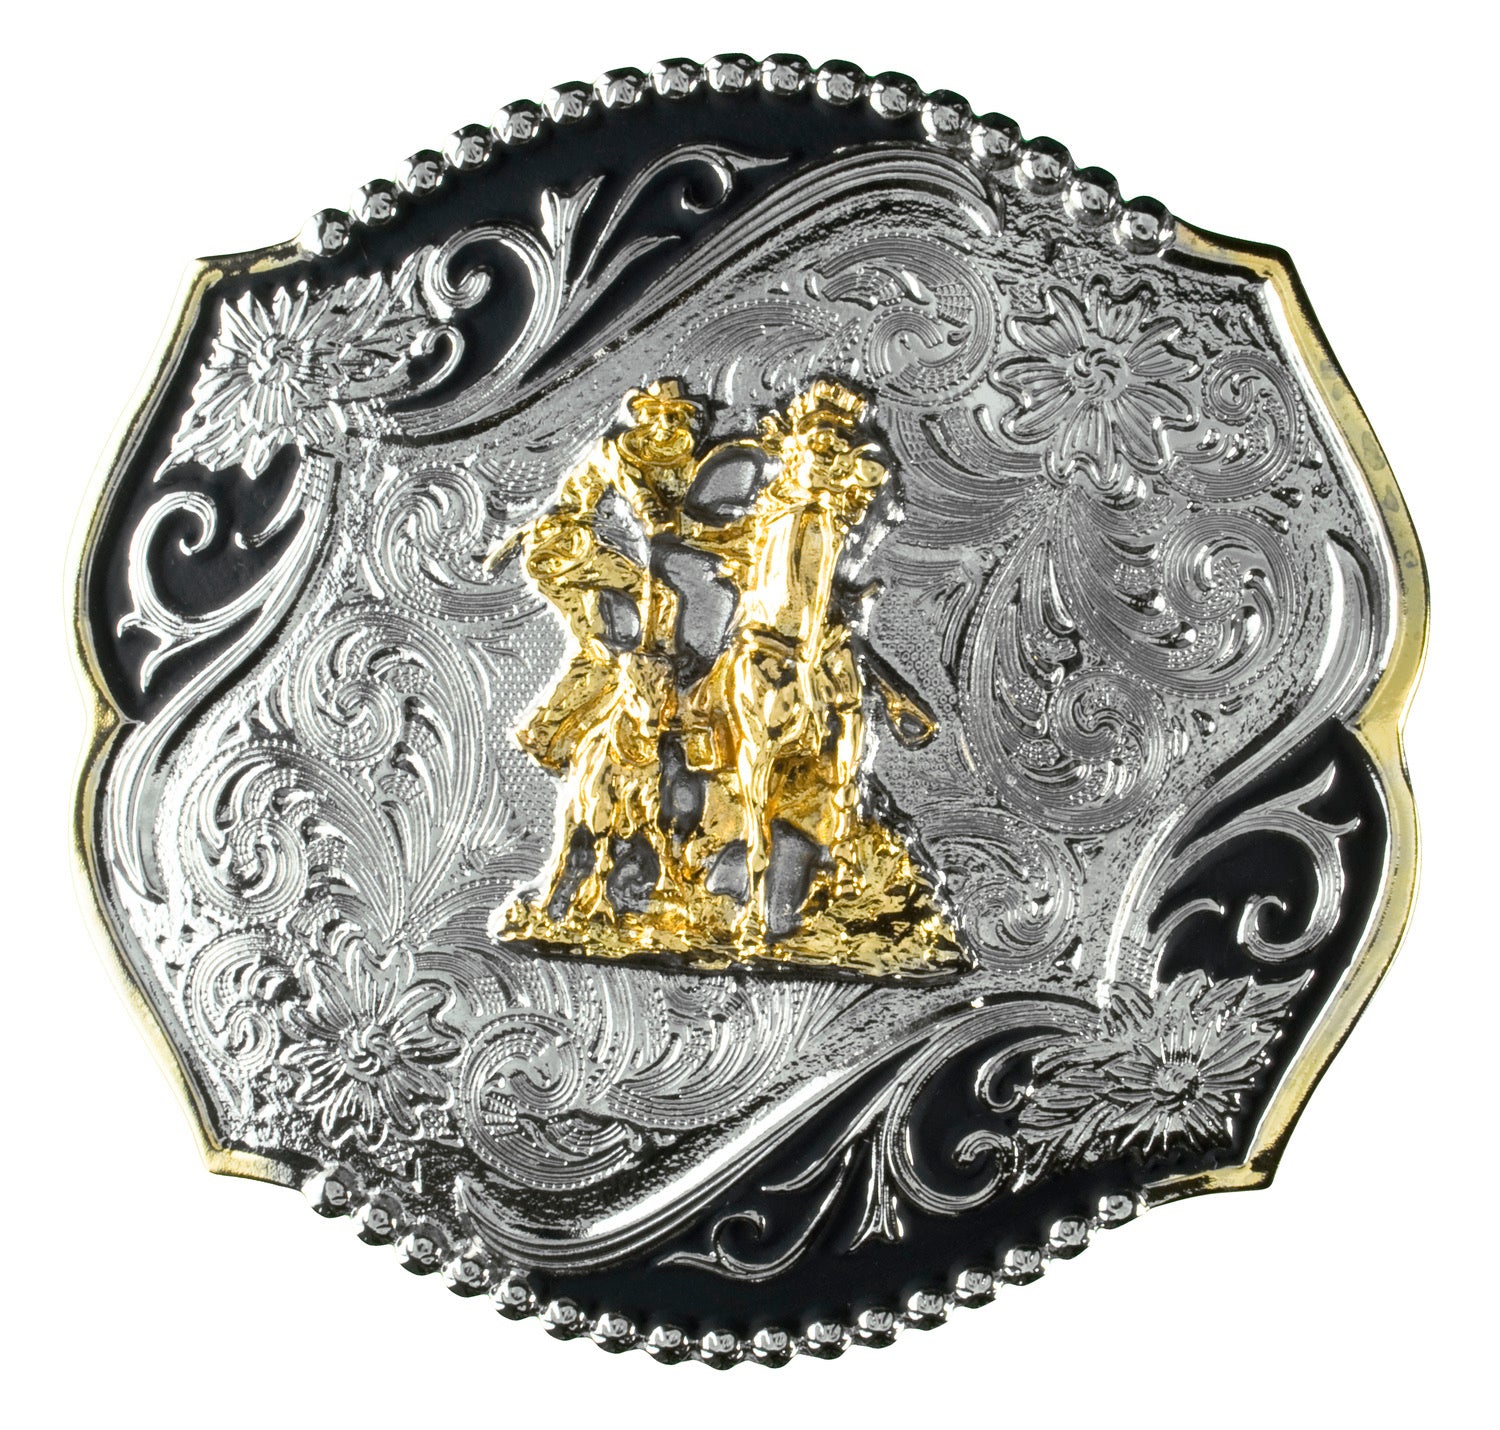 Calf Roper Engraved 2 Tone Buckle by Taylor Brand TBB4000CR